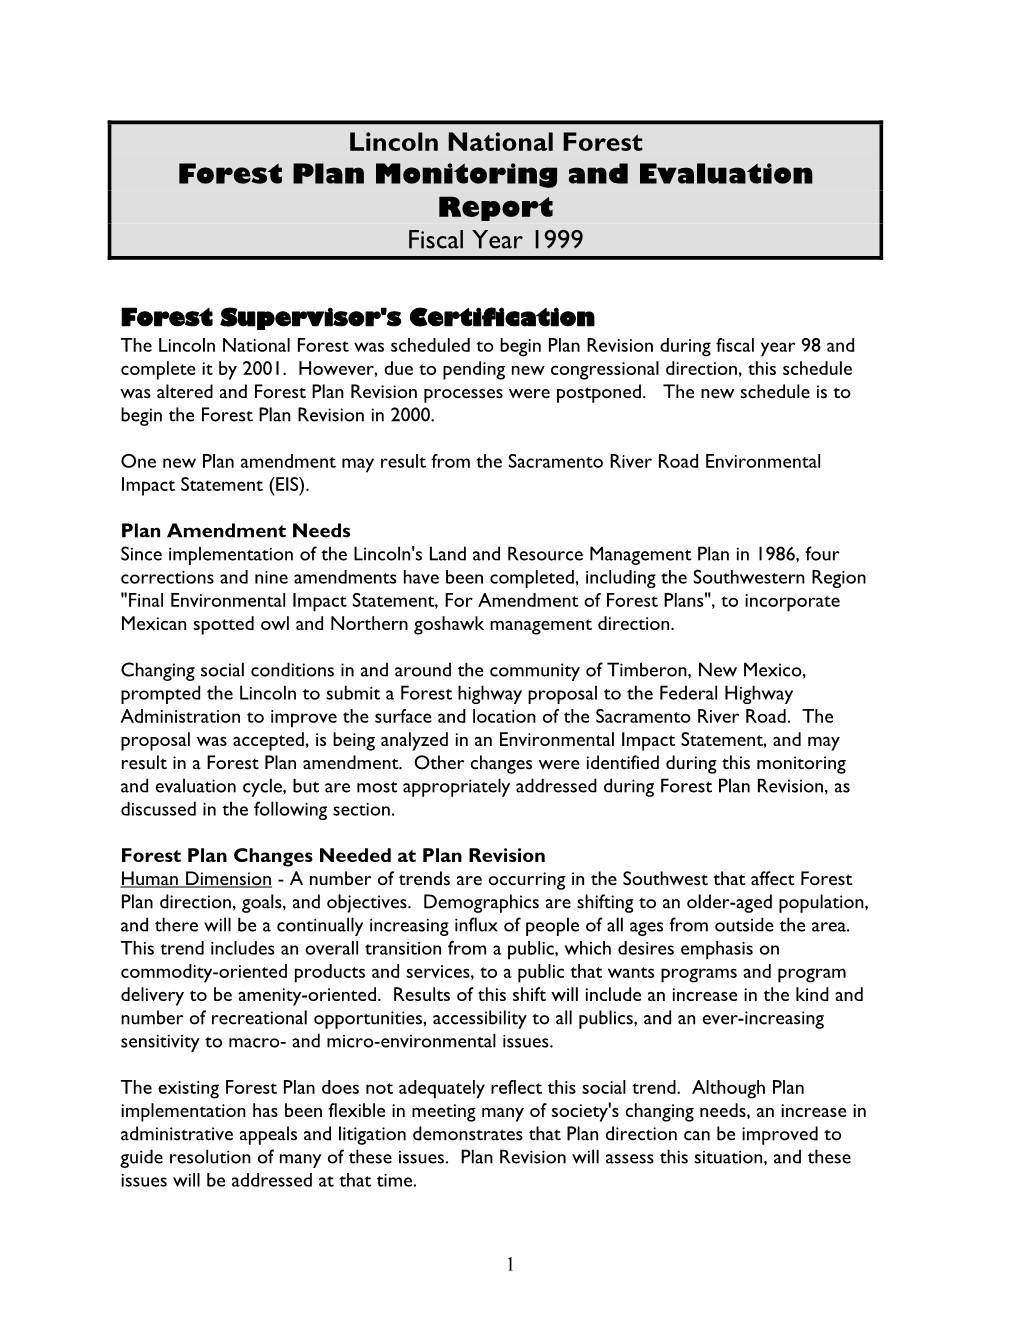 Lincoln National Forest Forest Plan Monitoring and Evaluation Report Fiscal Year 1999